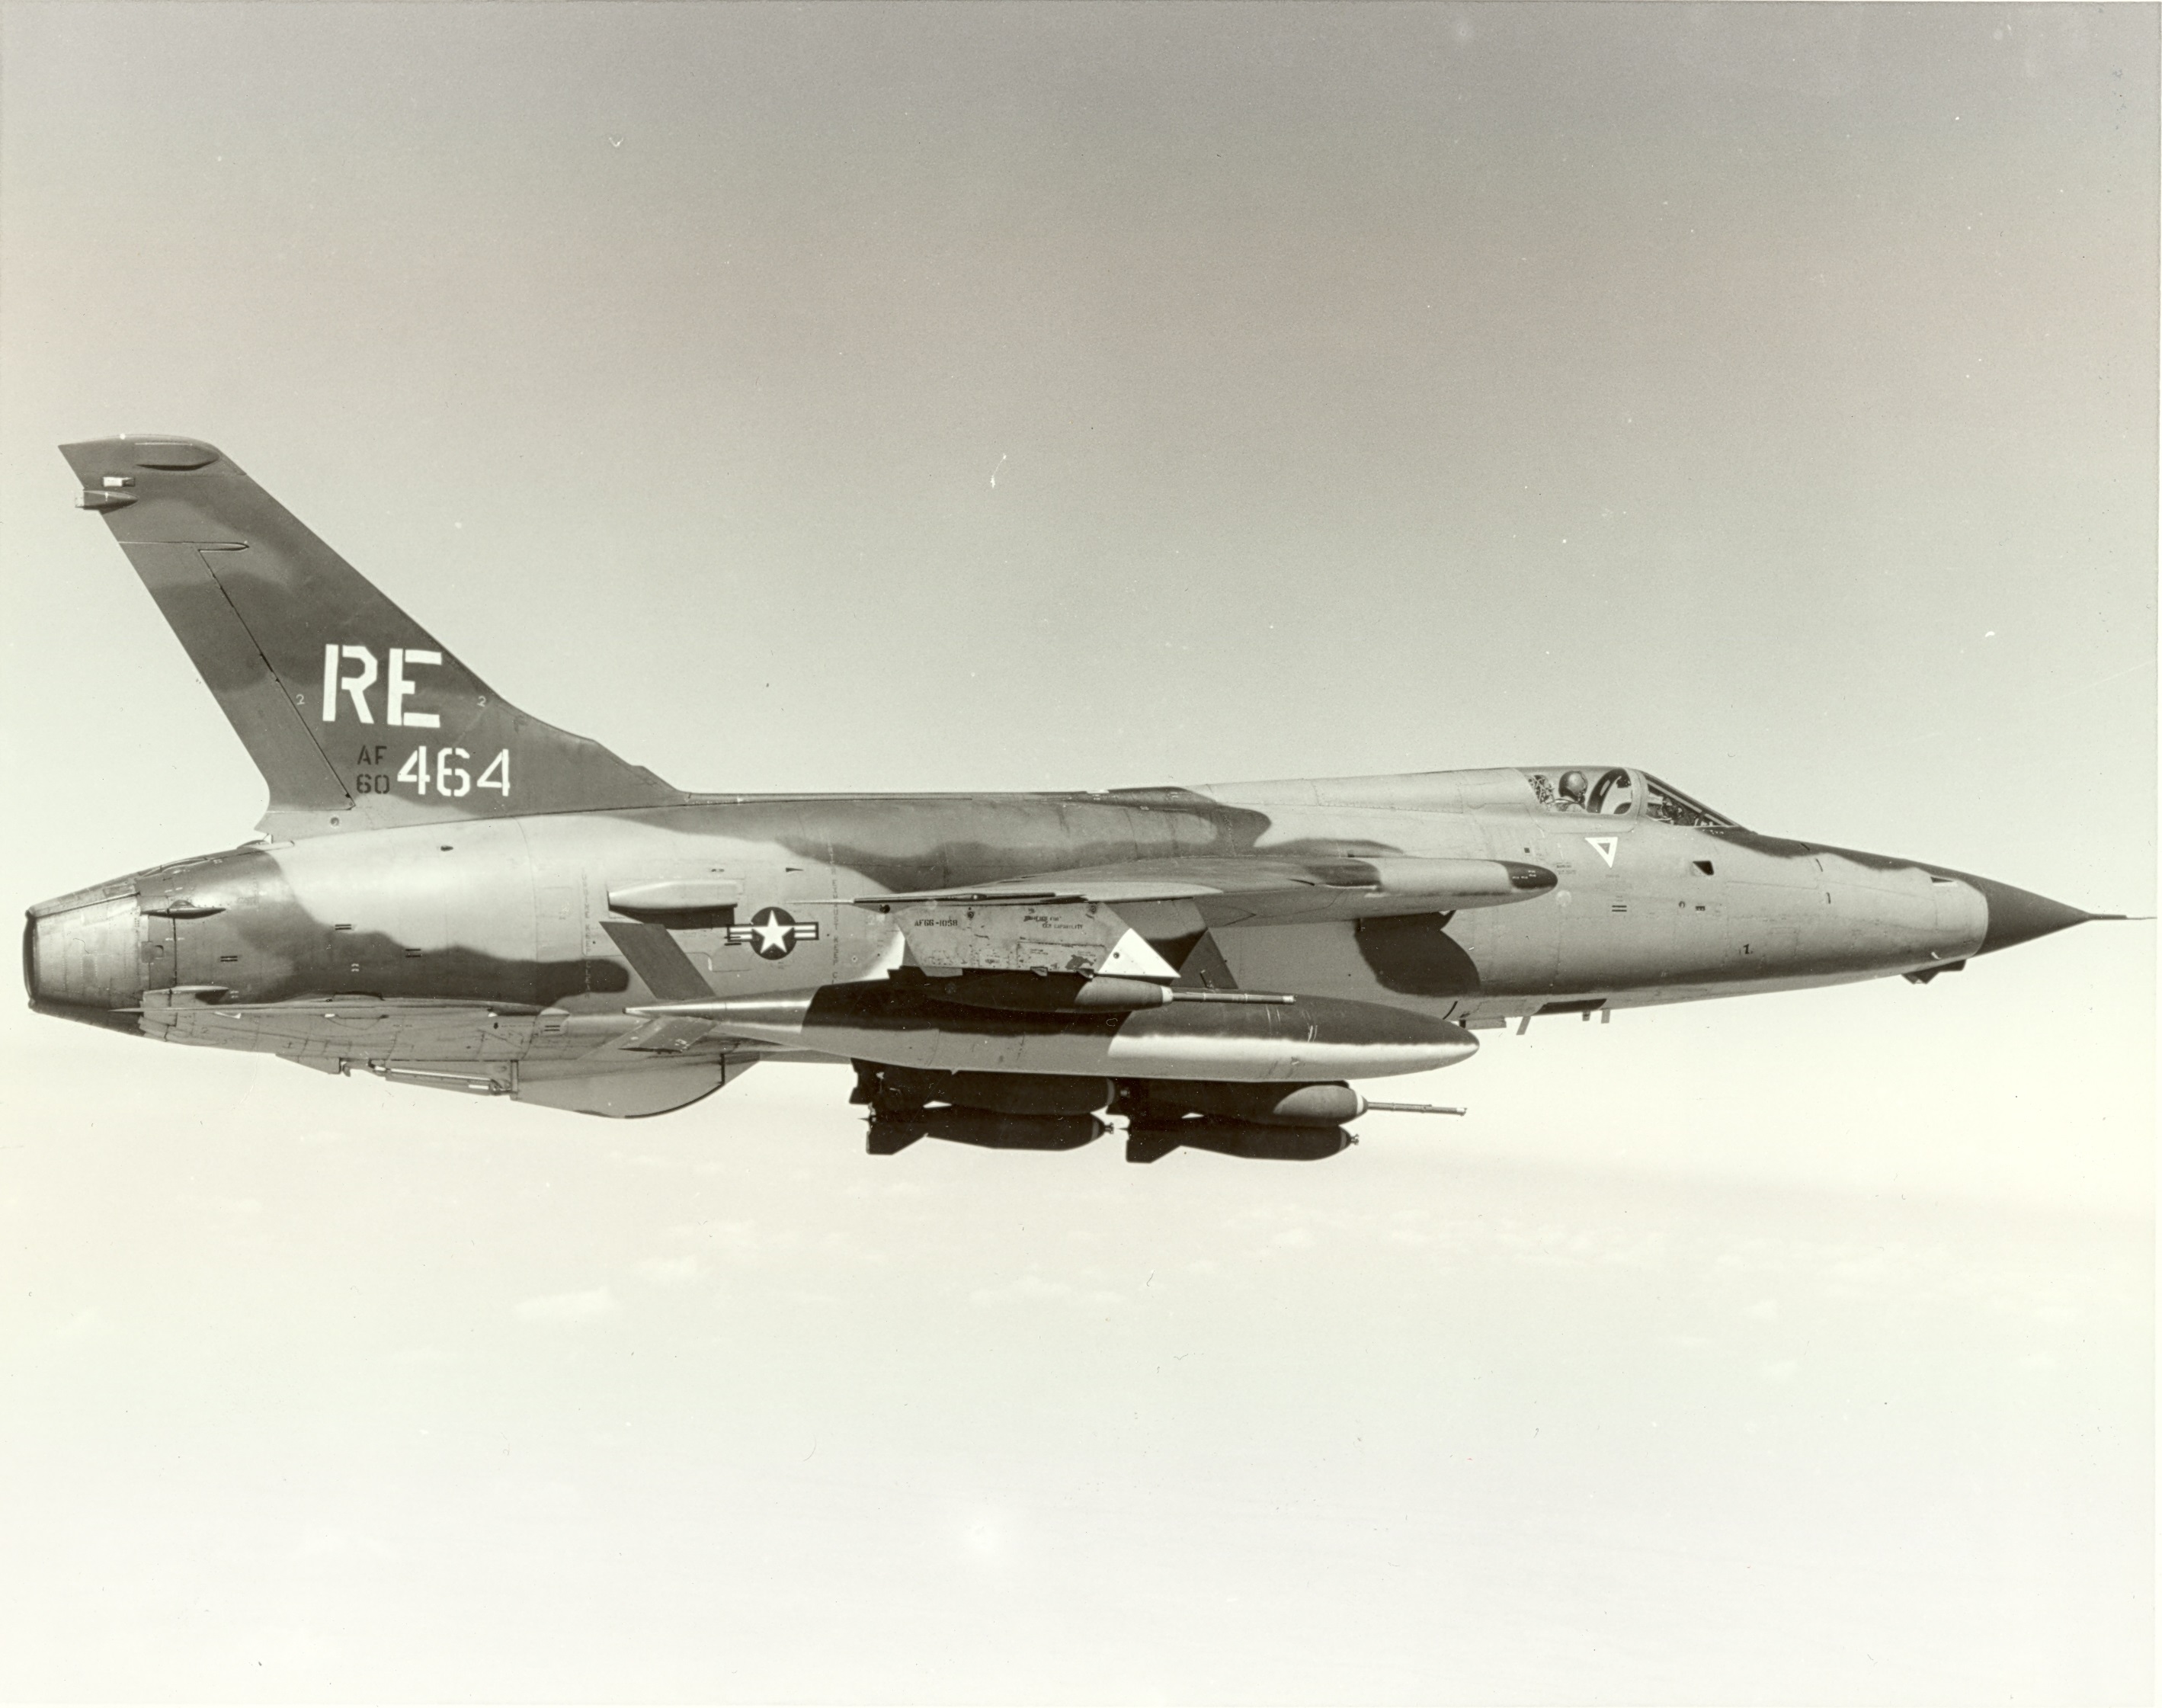 Republic F-105F-10-RE Thunderchief 60-0464, 355th Tactical Fighter Wing, Takhli RTAFB. (U.S. Air Force)